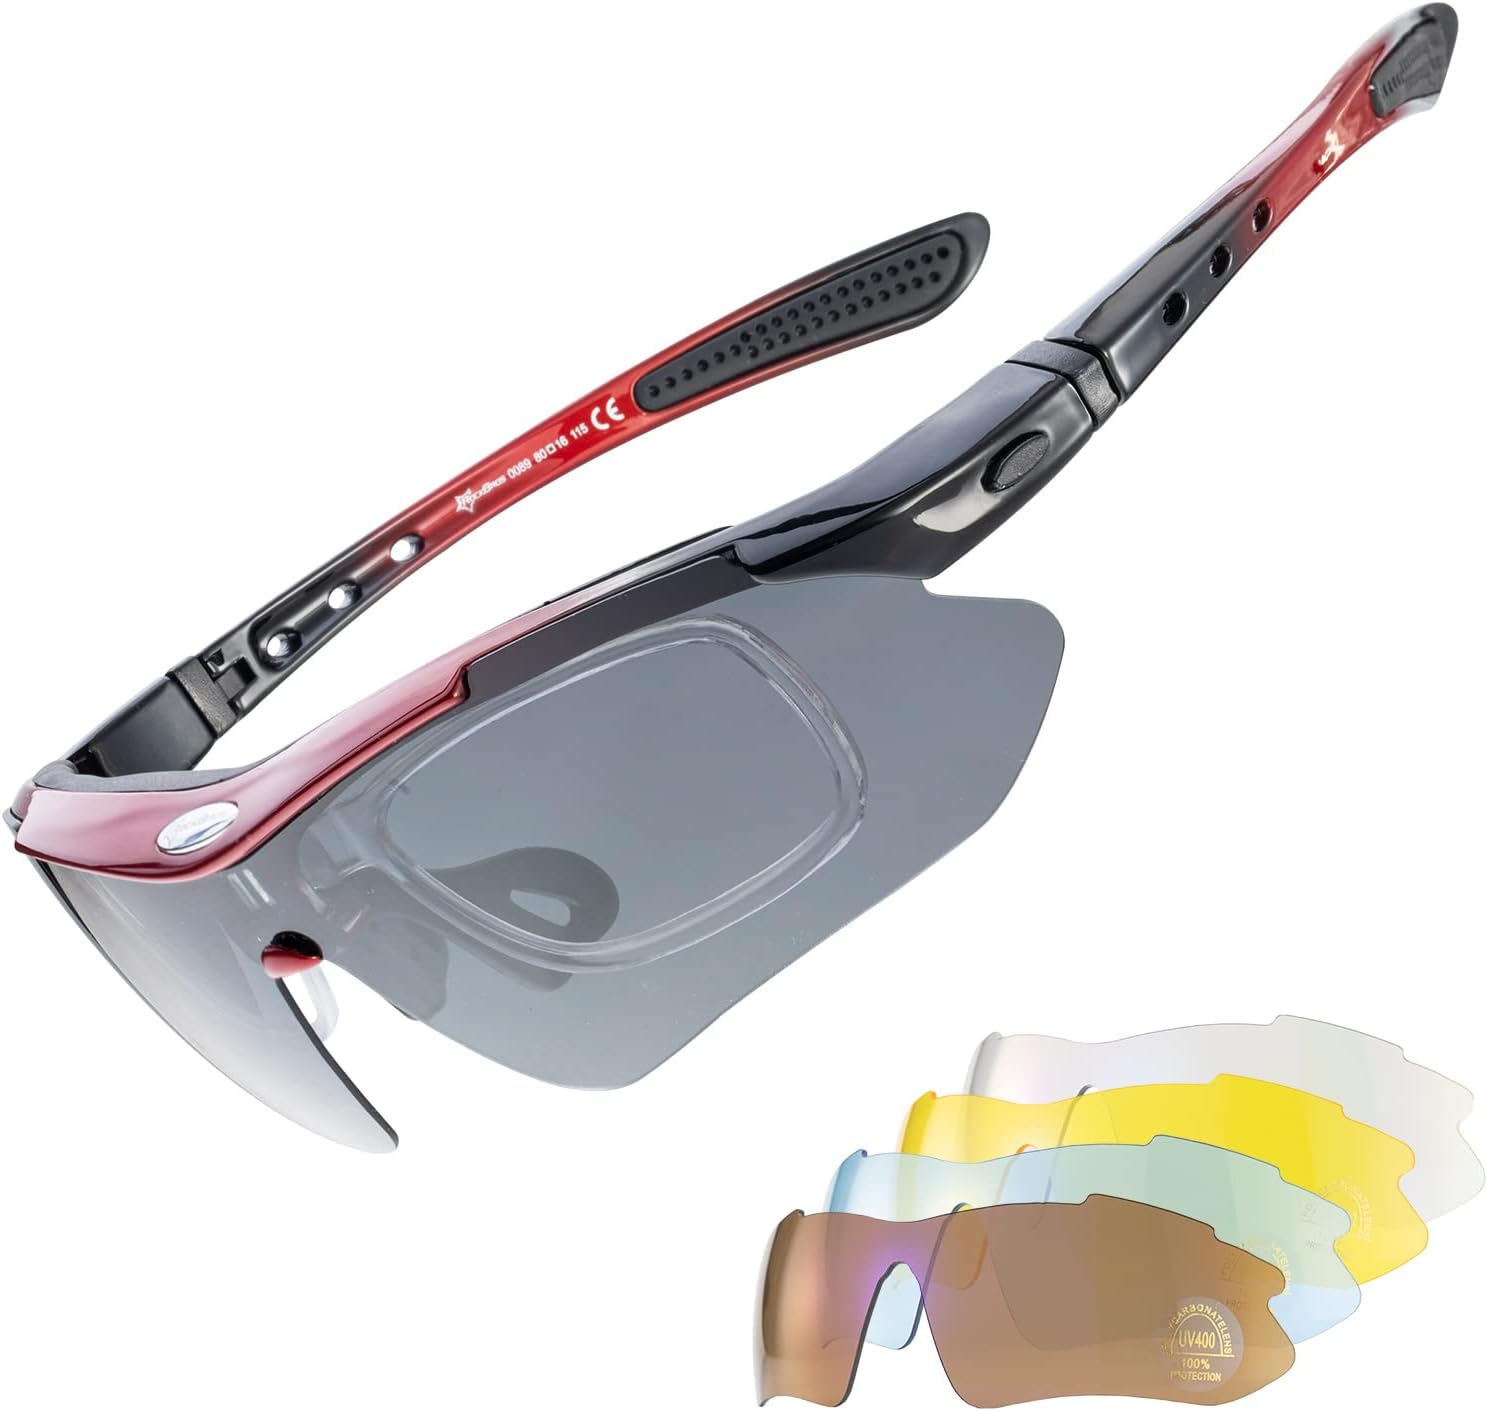 ROCKBROS-Slim Polarised Sports Sunglasses with 4 Interchangeable Lens, Red